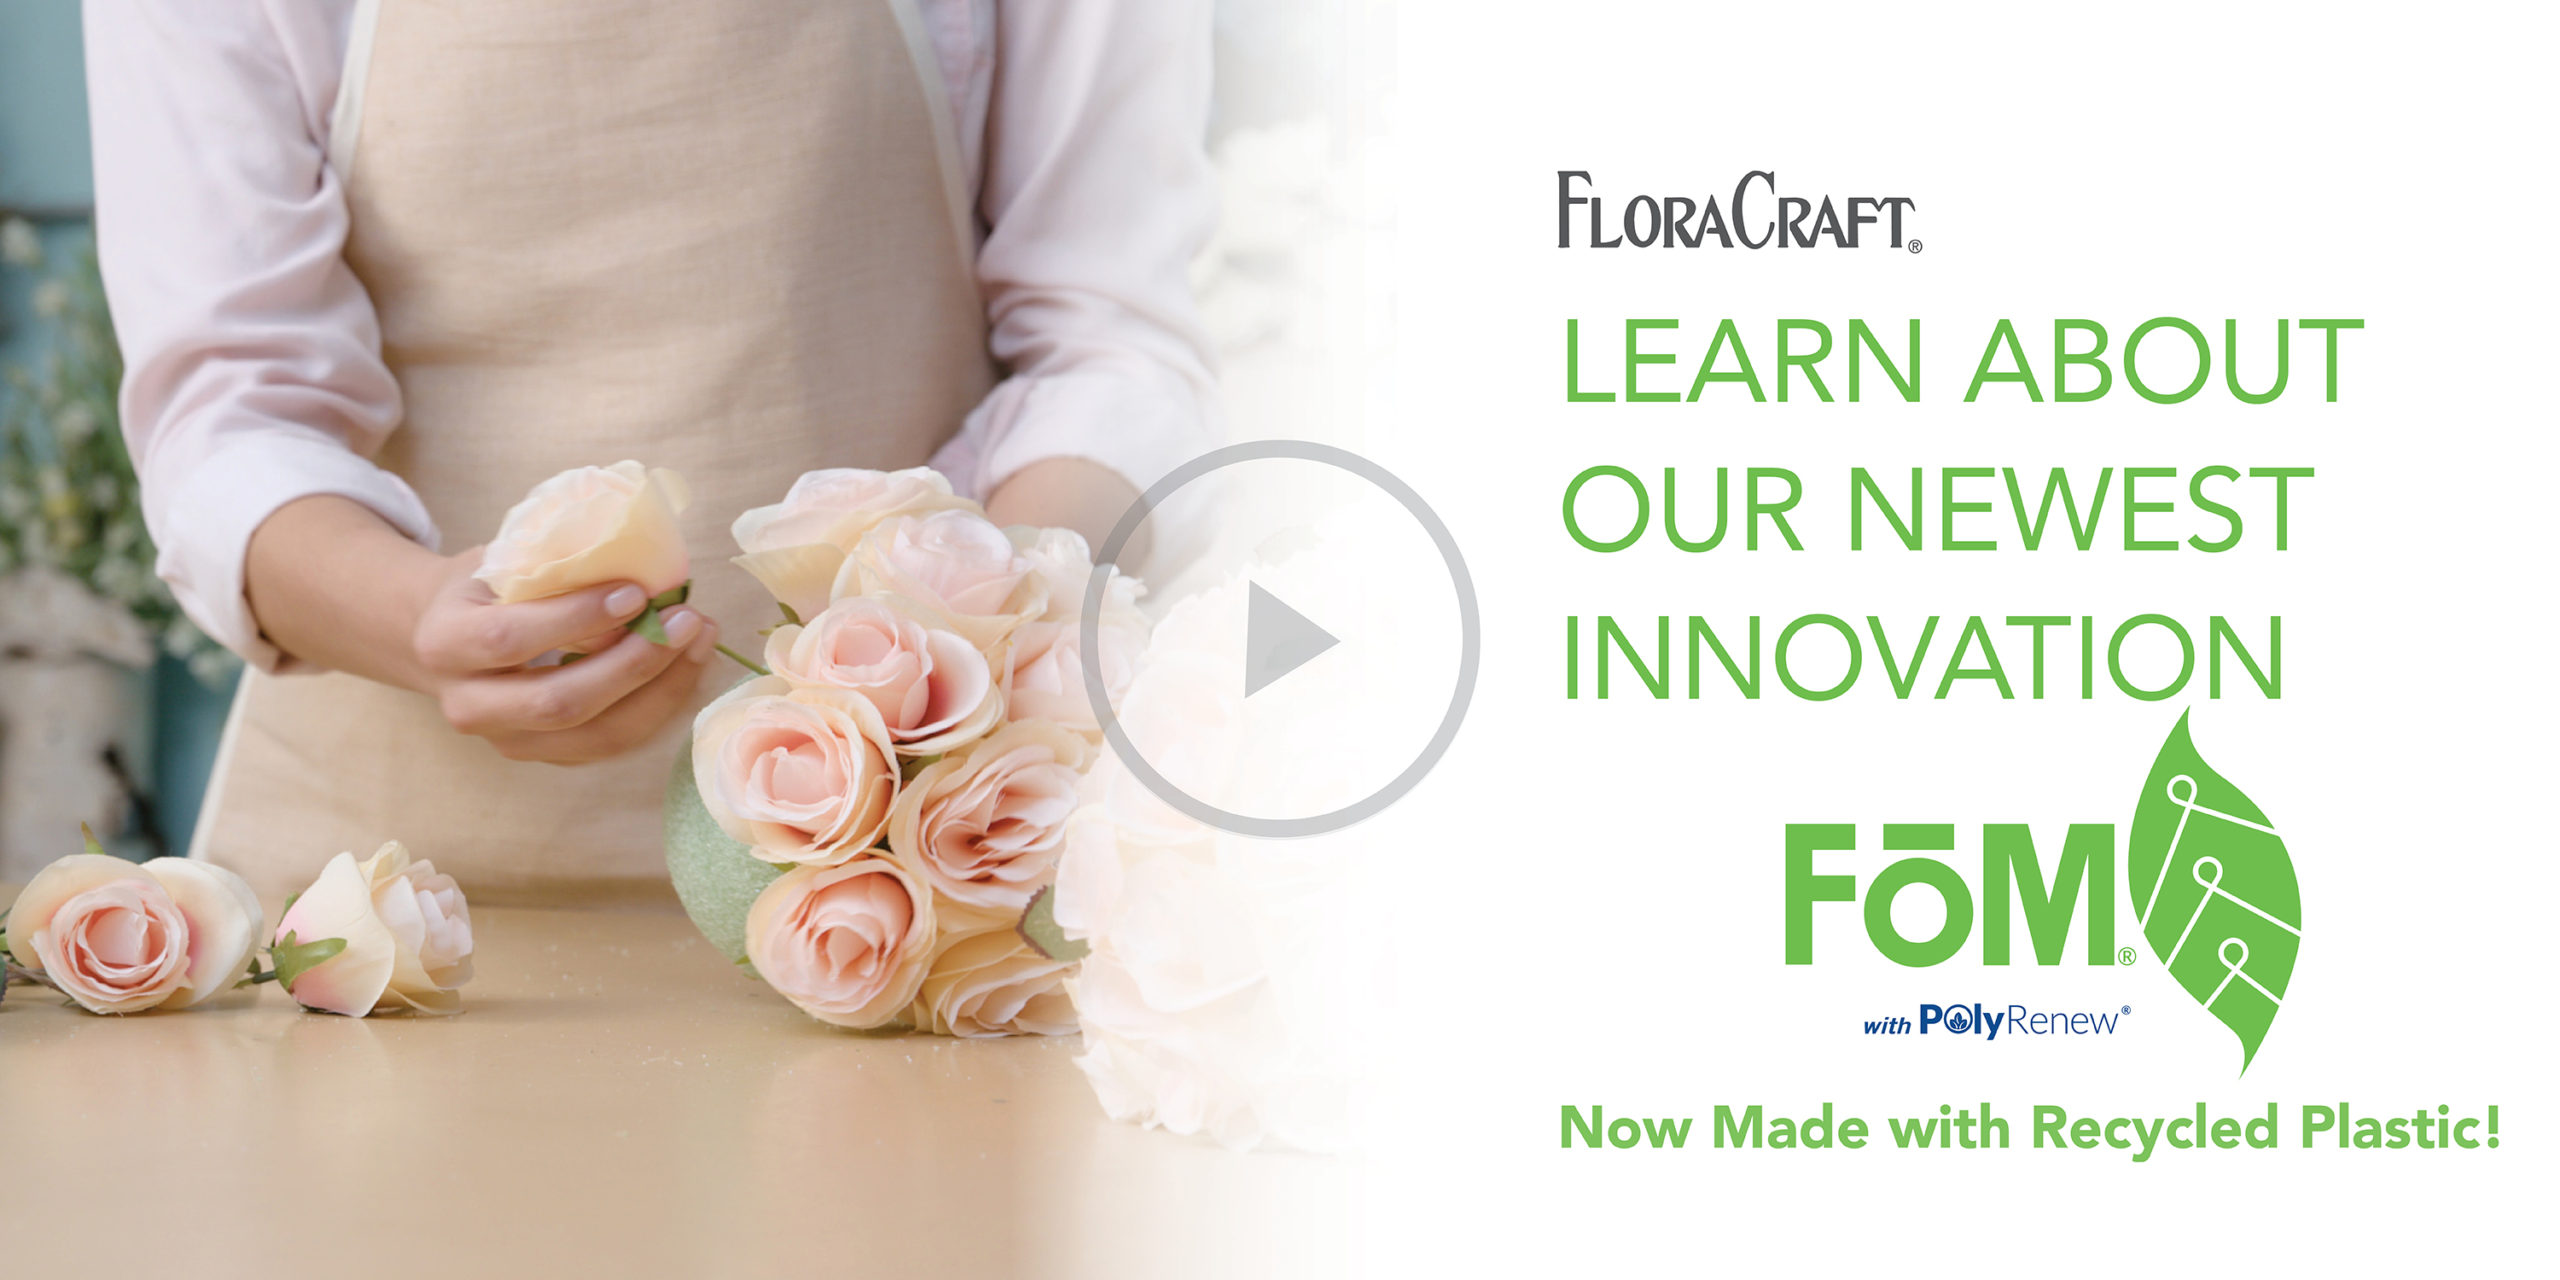 Wholesale floral foam ball To Decorate Your Environment 